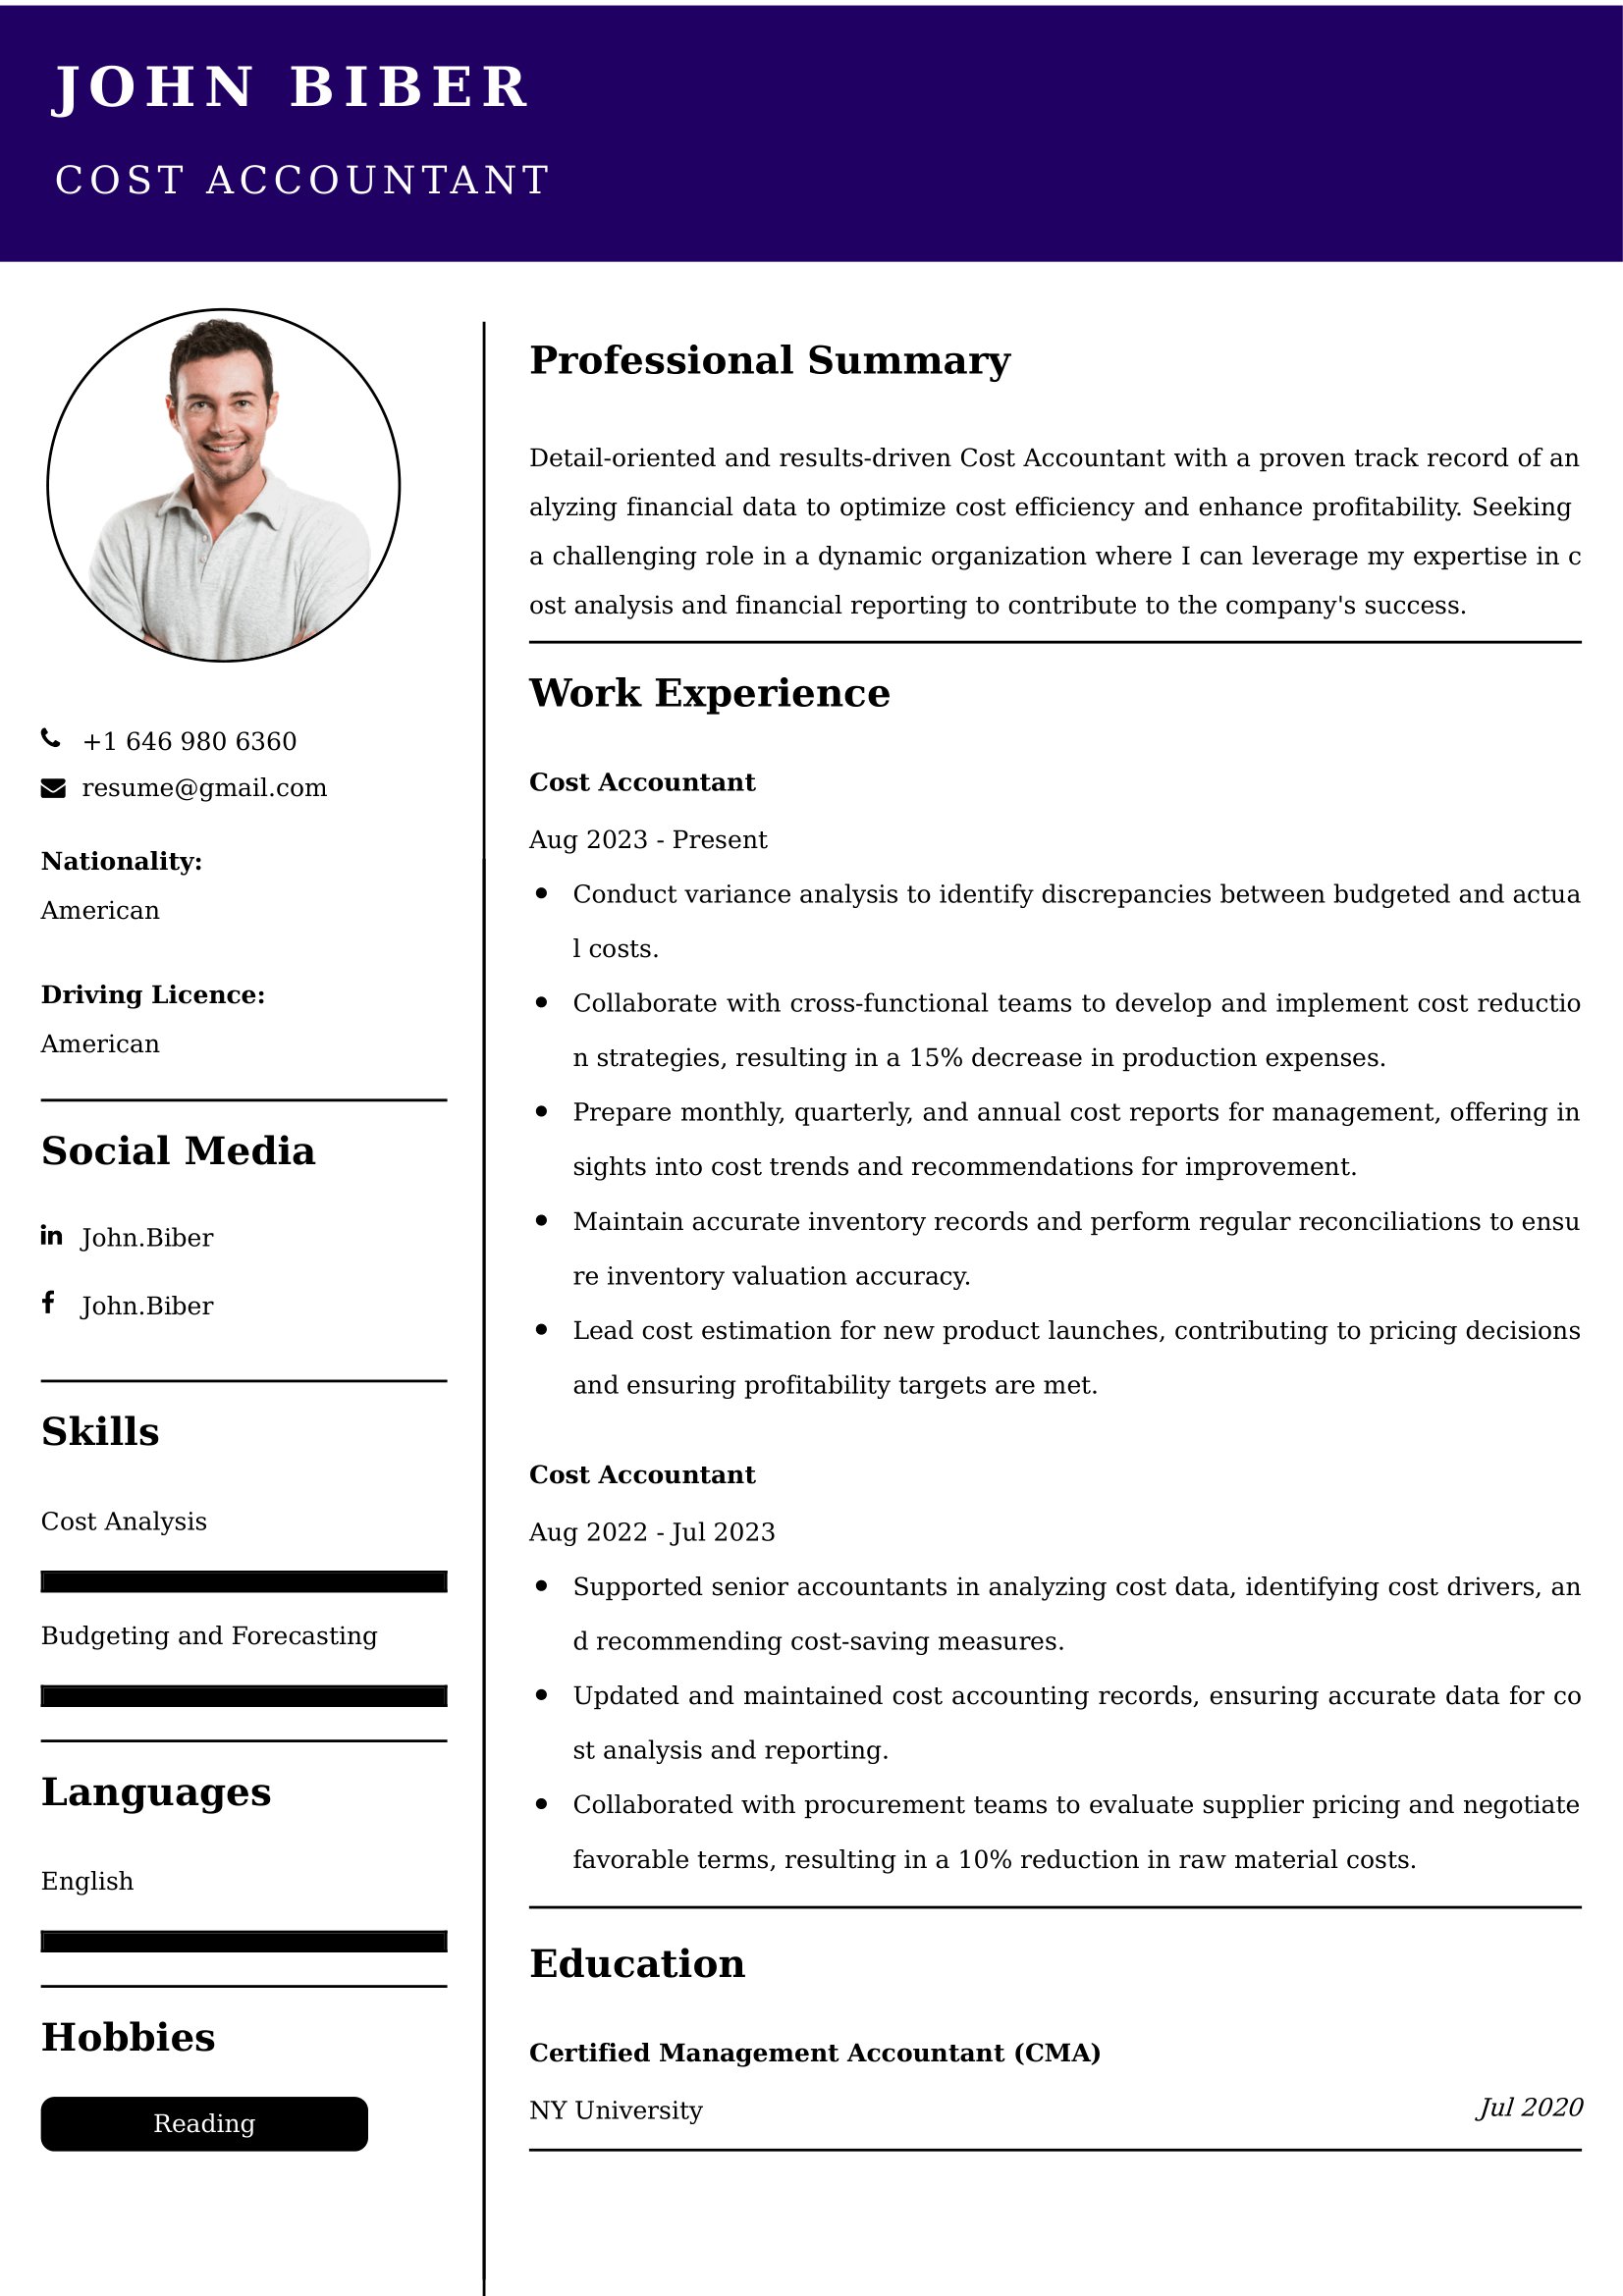 Cost Accountant Resume Examples for UK Jobs - Tips and Guide